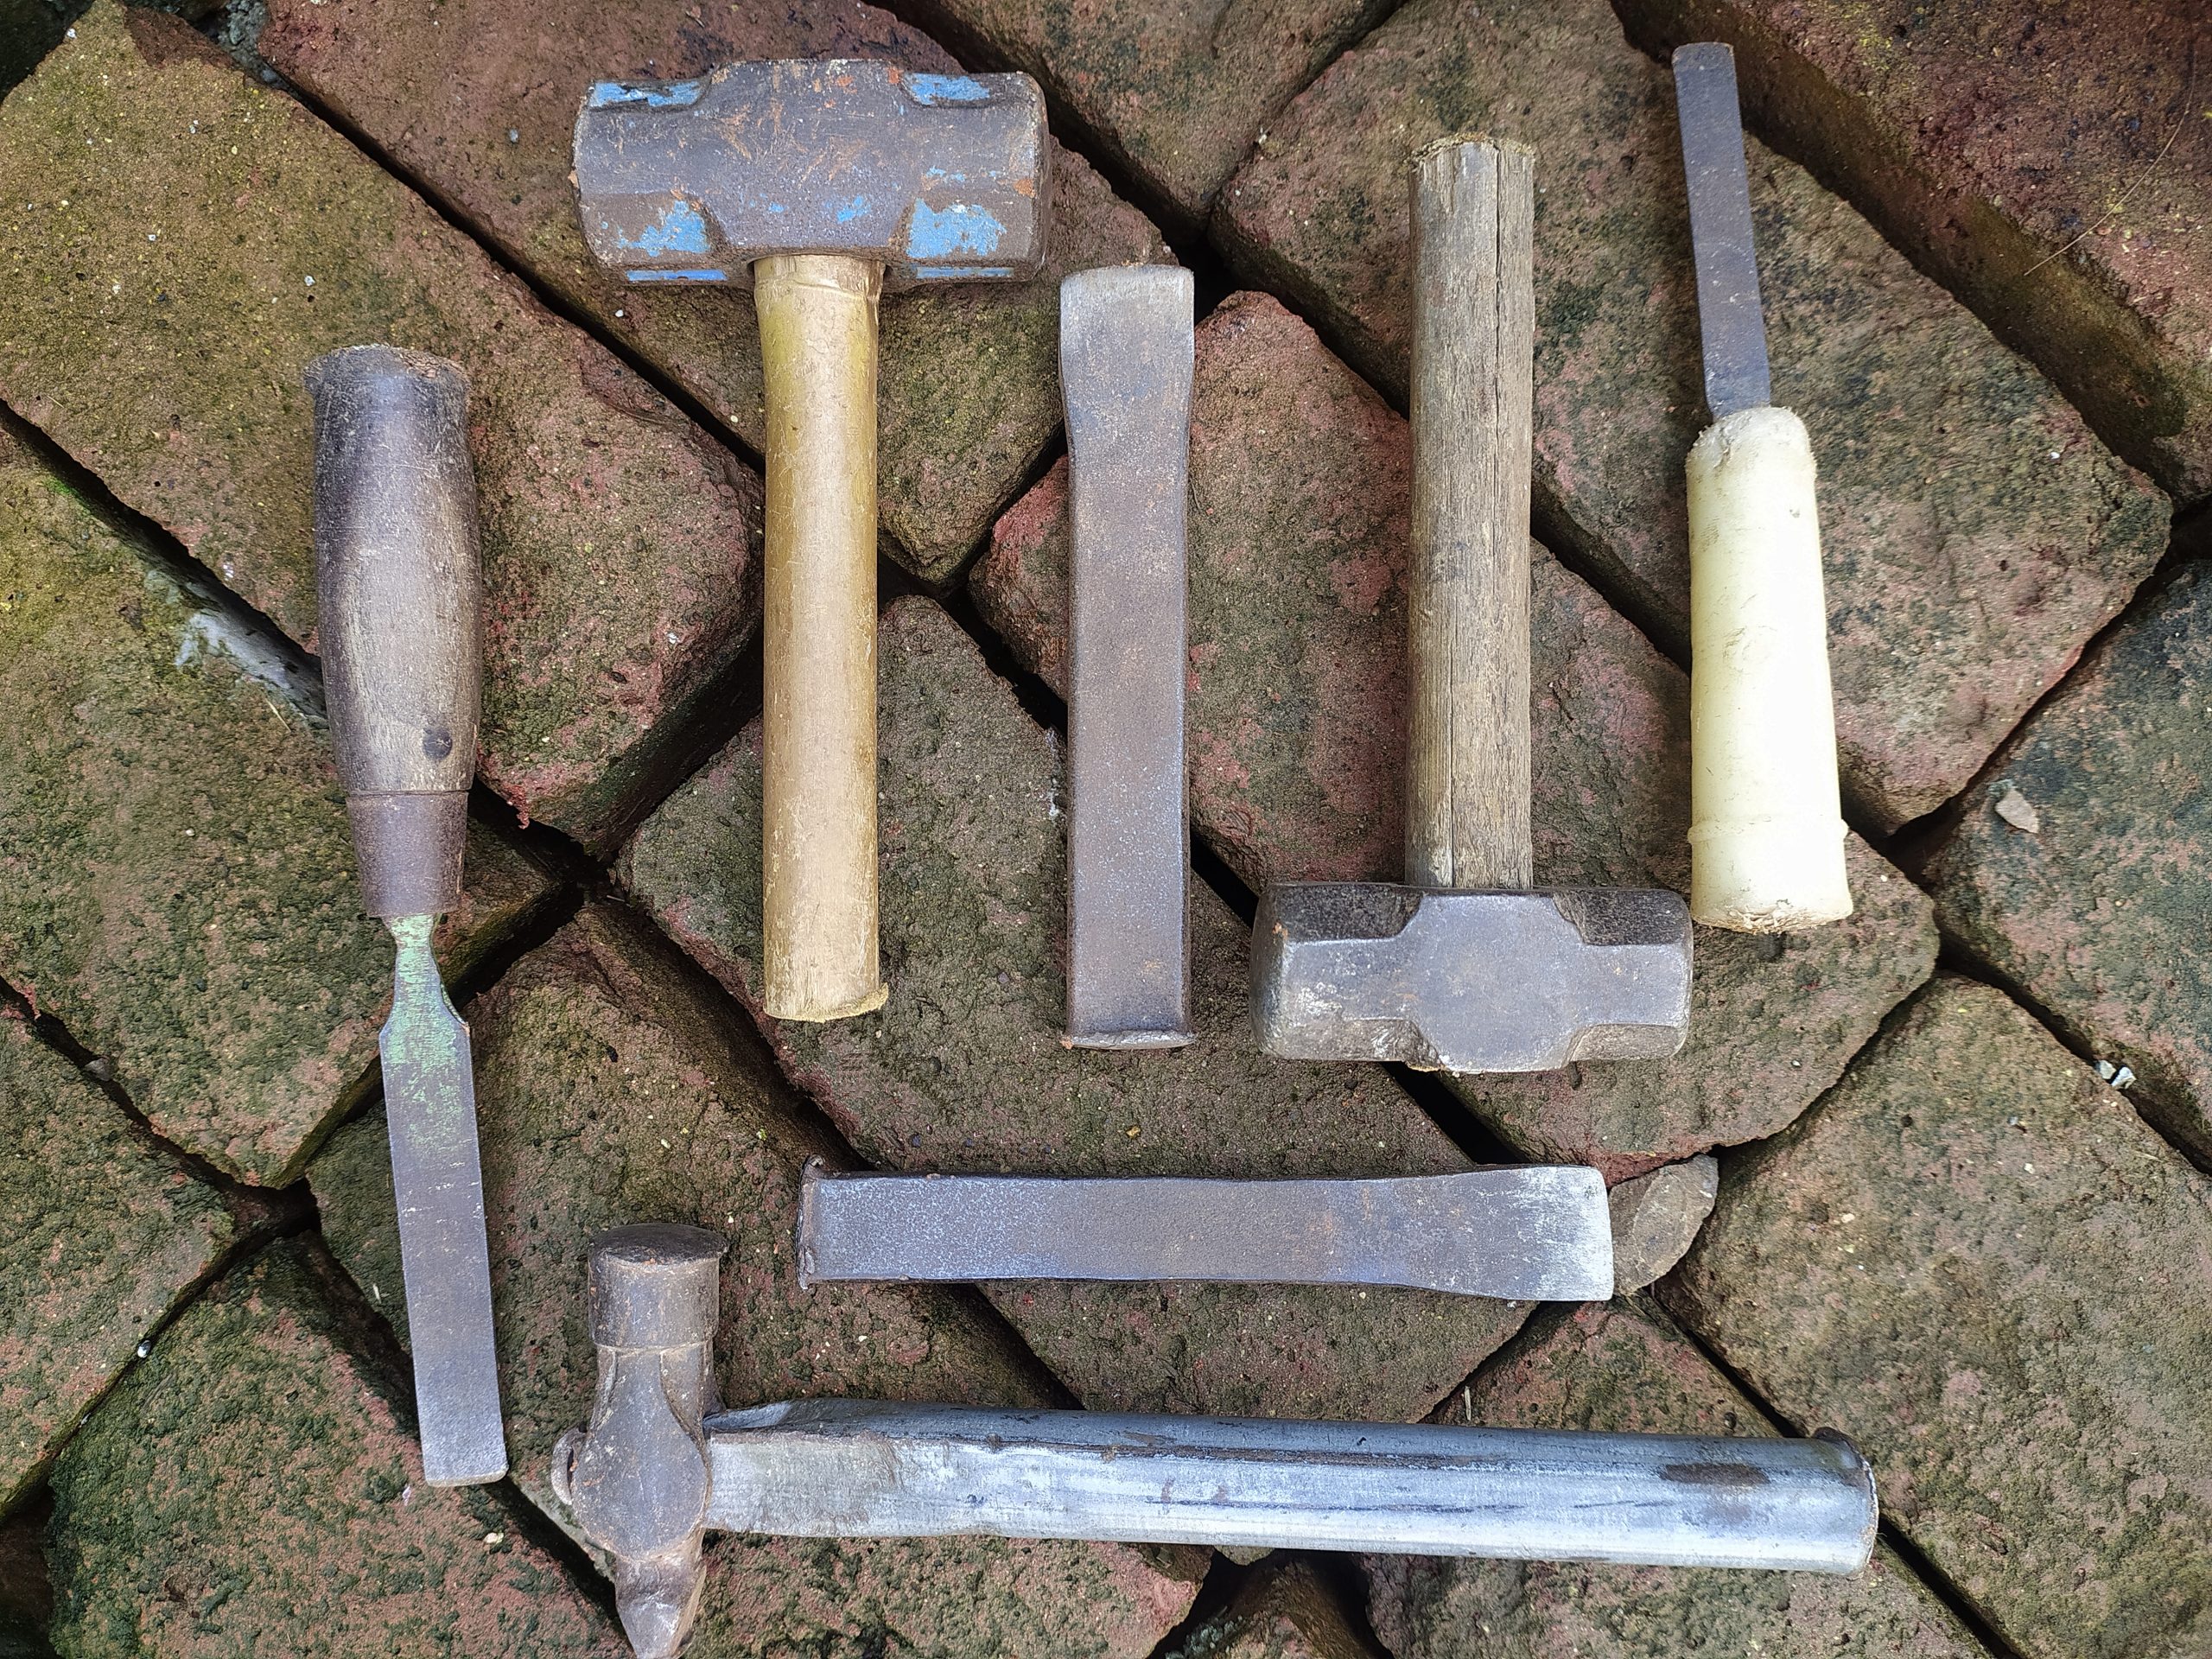 Tools of a construction worker